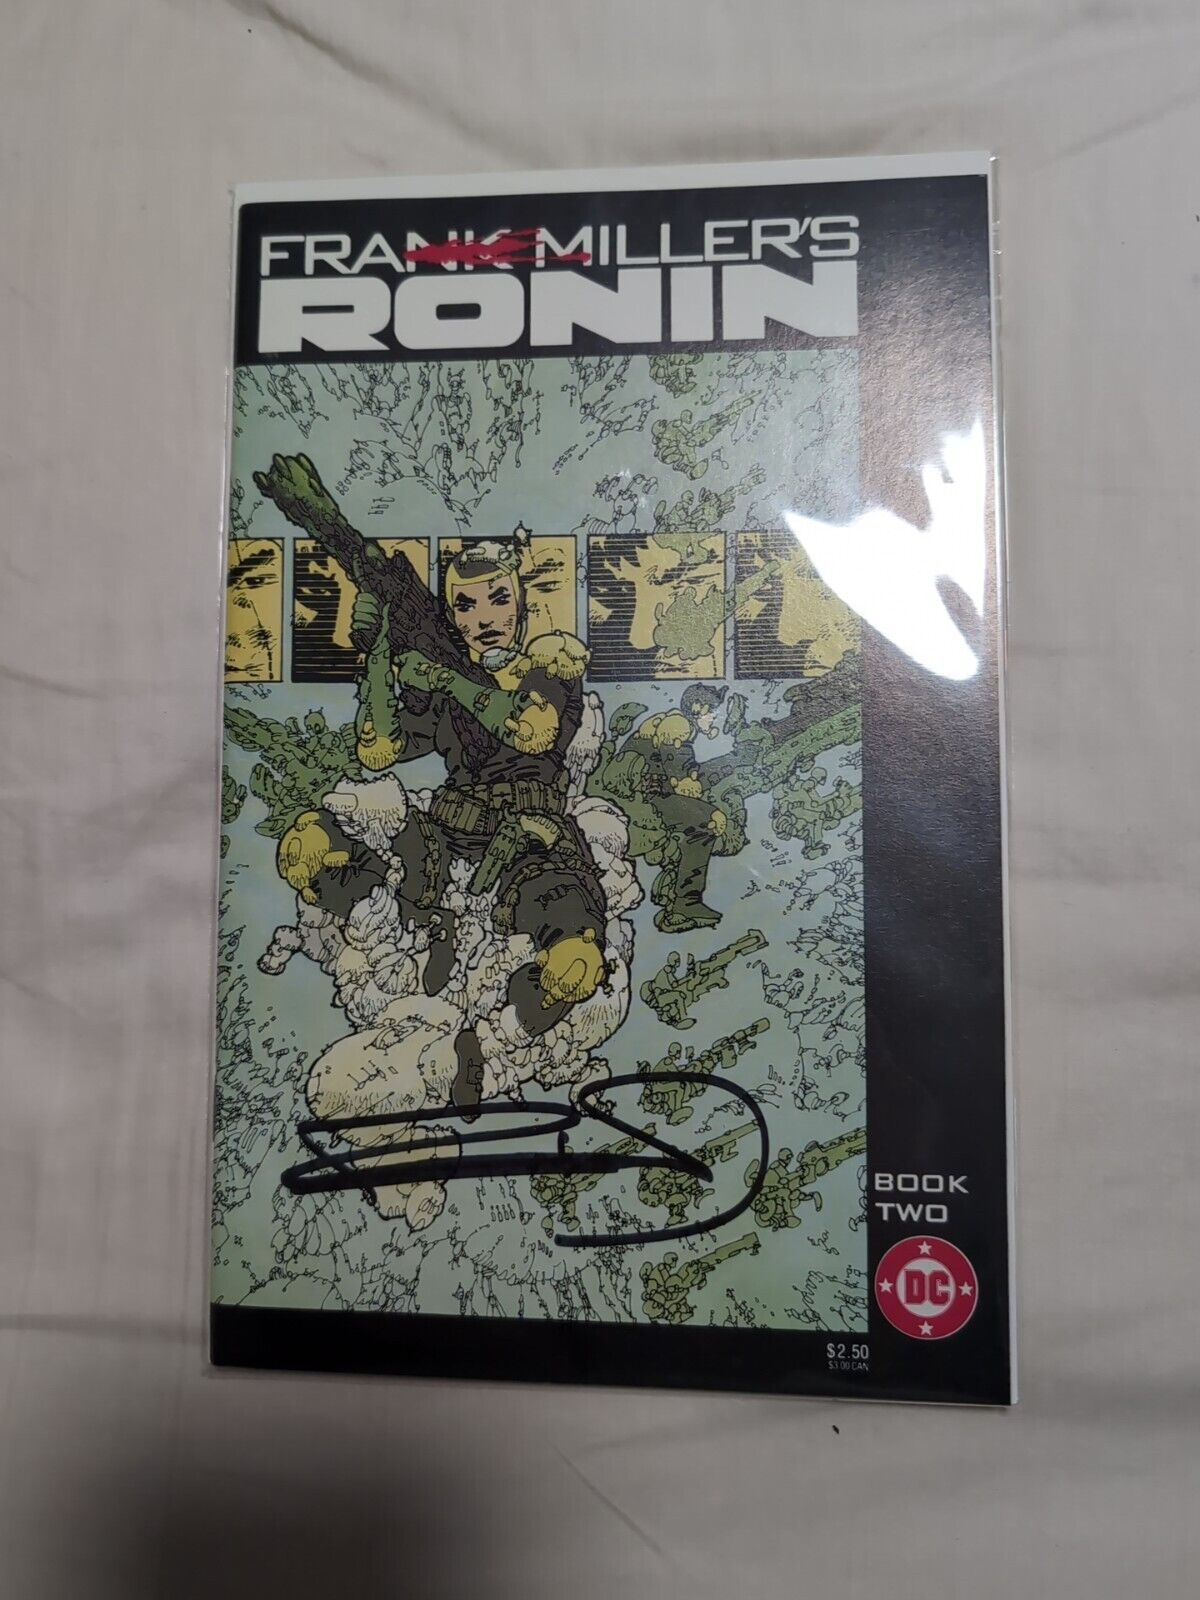 Frank Millers Ronin, Book Two. Signed by Frank Miller W/COA